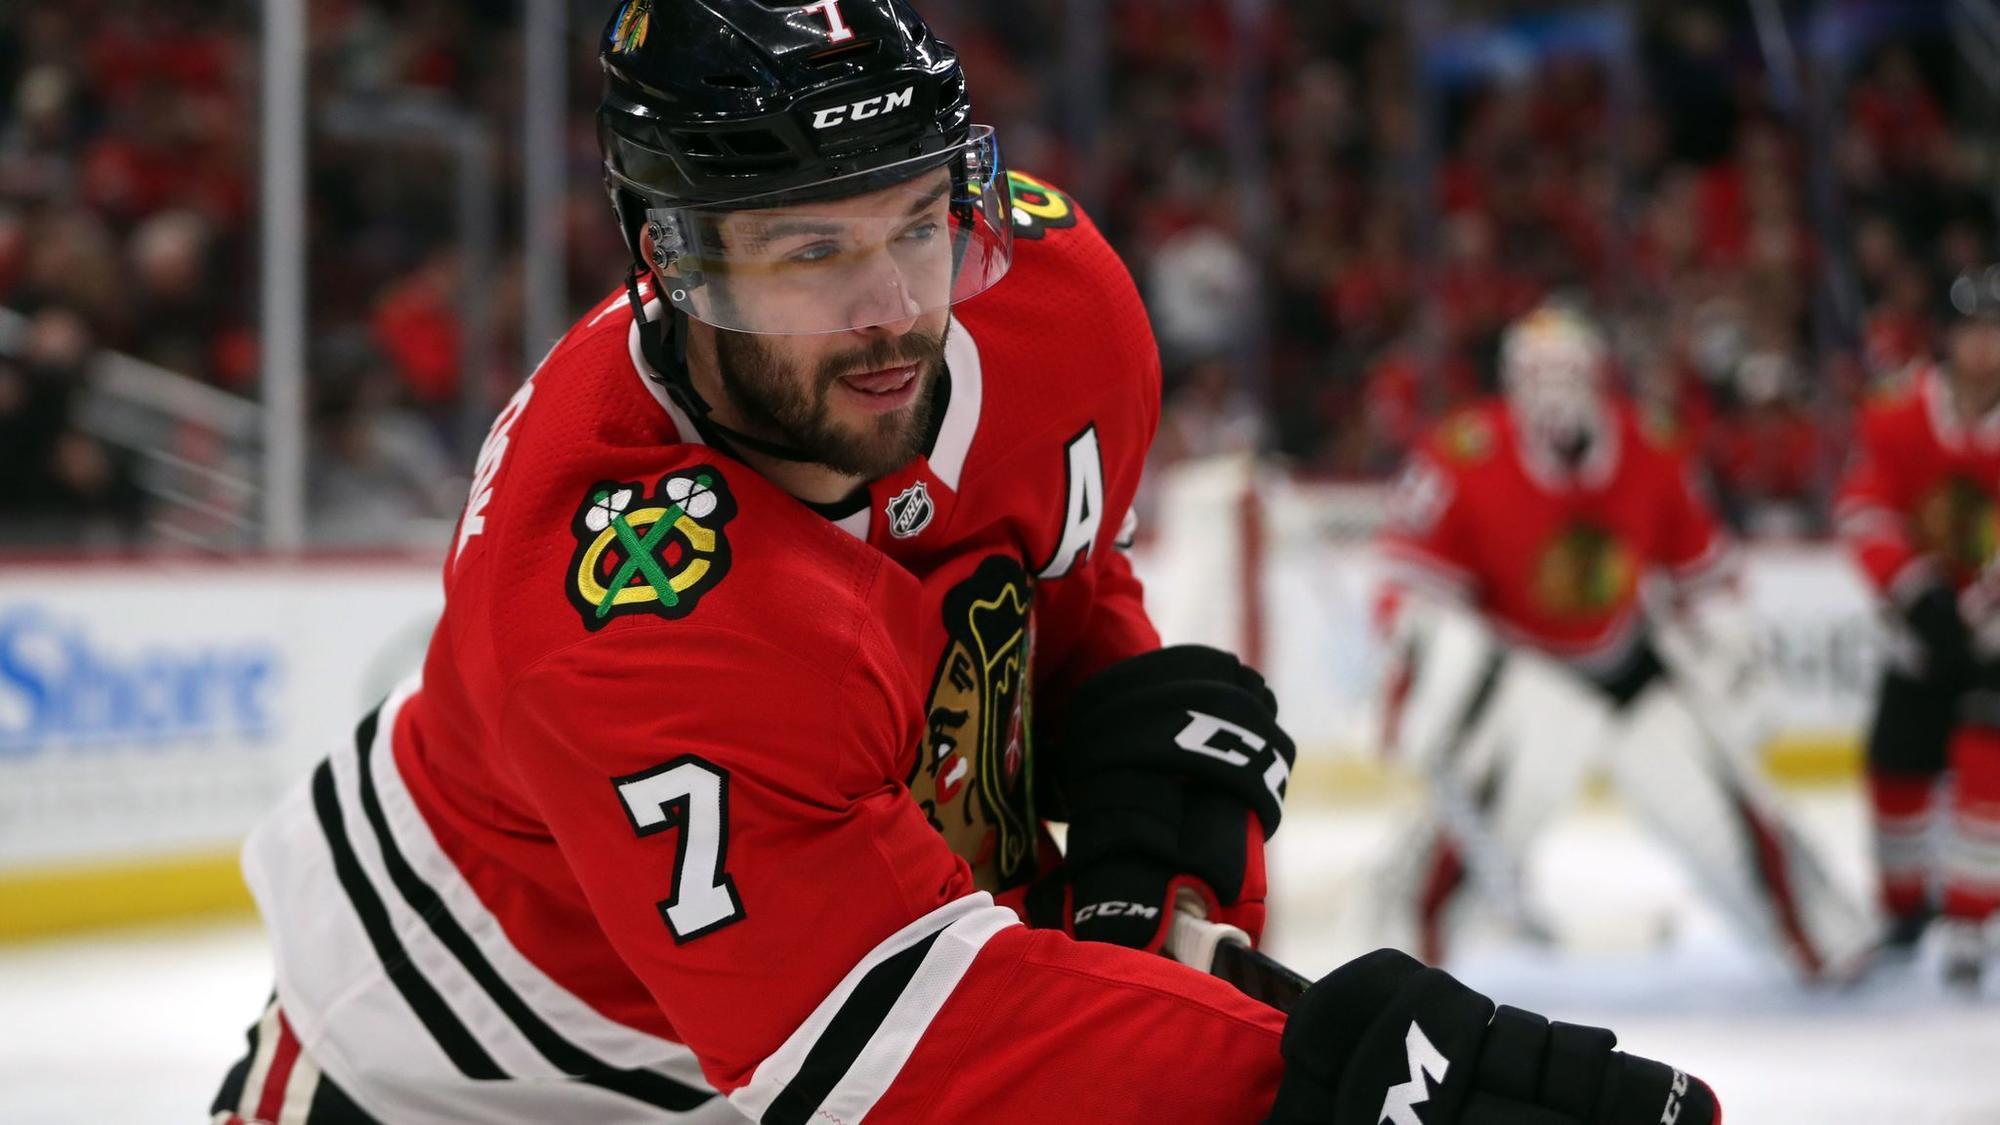 Brent Seabrook a scratch as Blackhawks continue search for right combinations